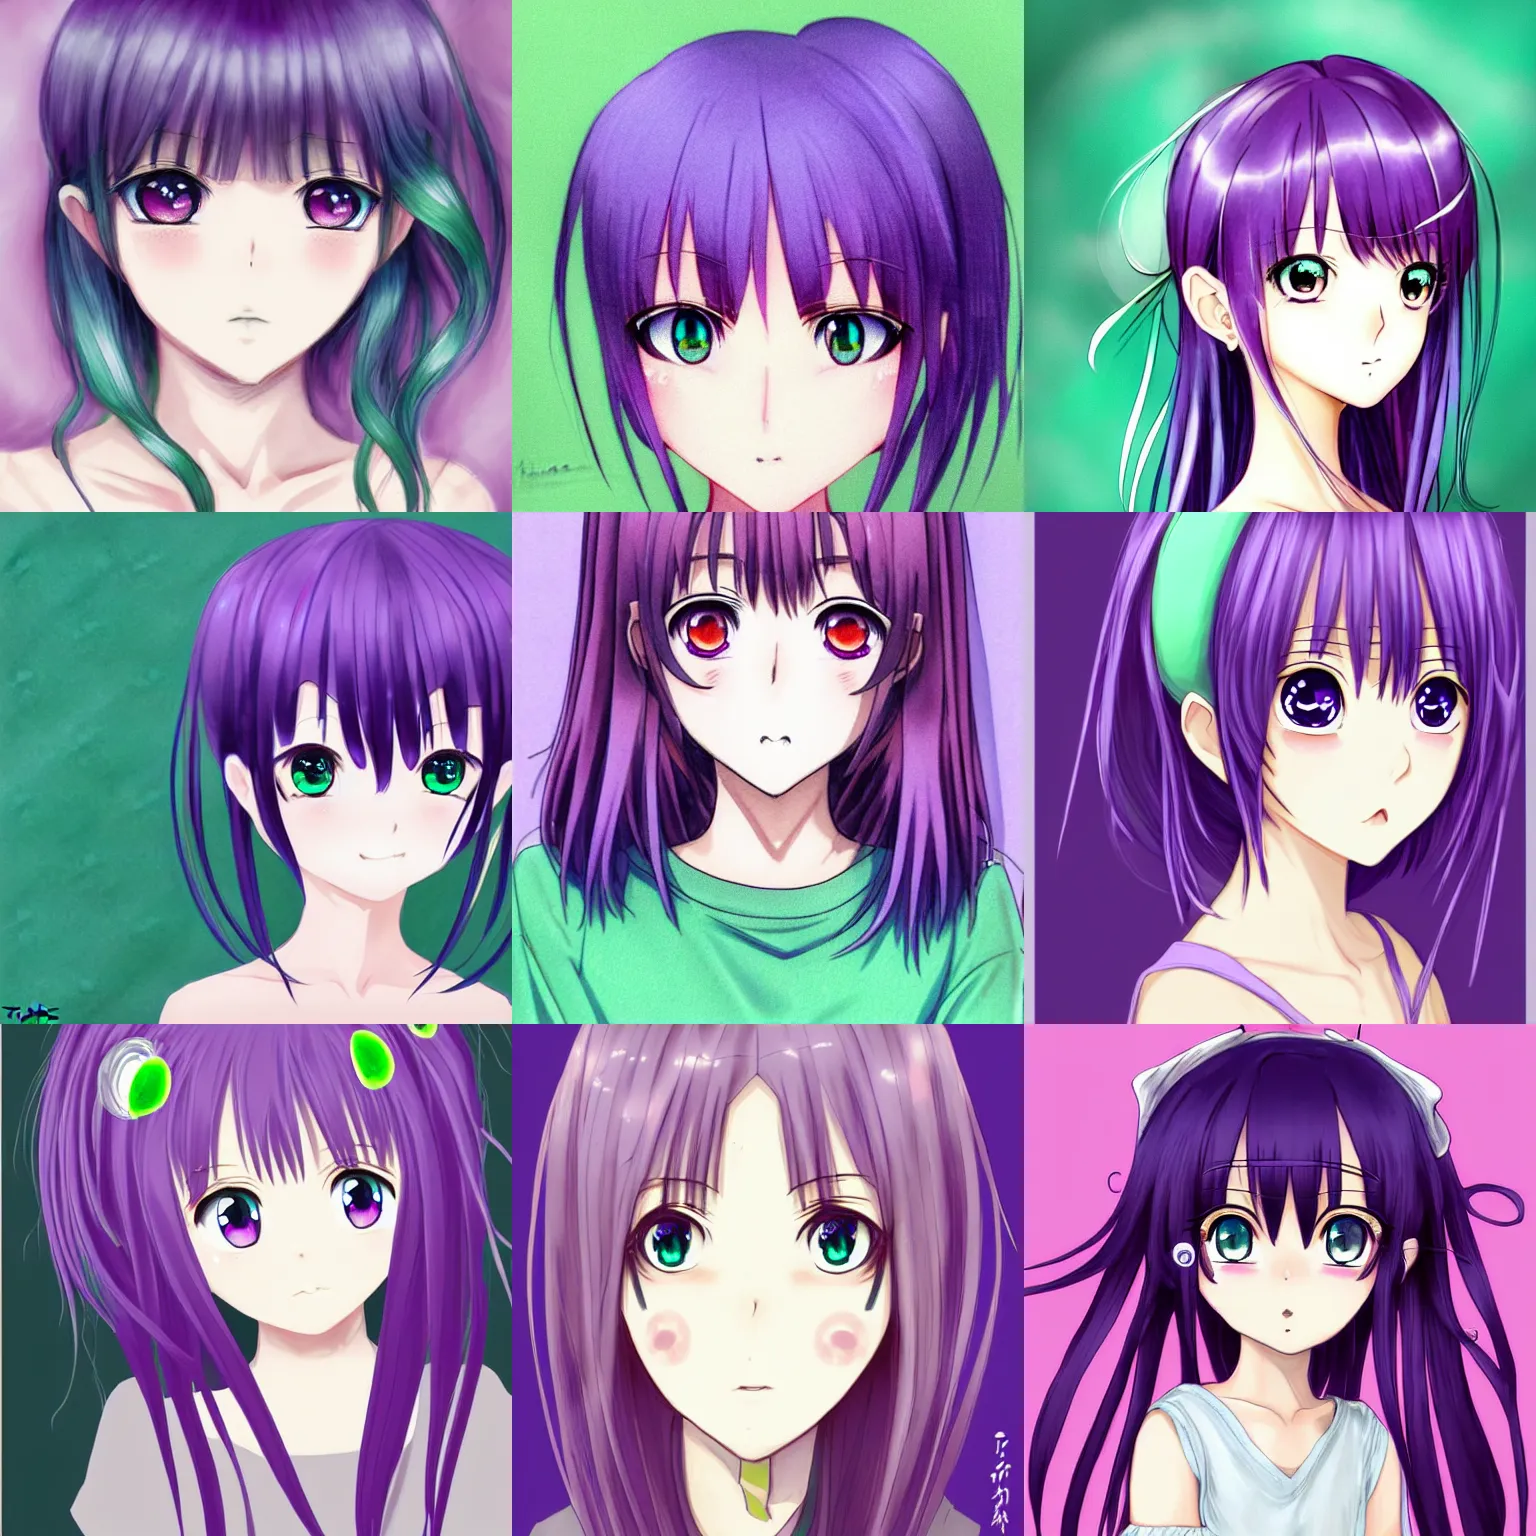 Prompt: cute pretty anime portrait with green eyes, big round eyes, symmetrical face, purple hair by Takeuchi Naoko